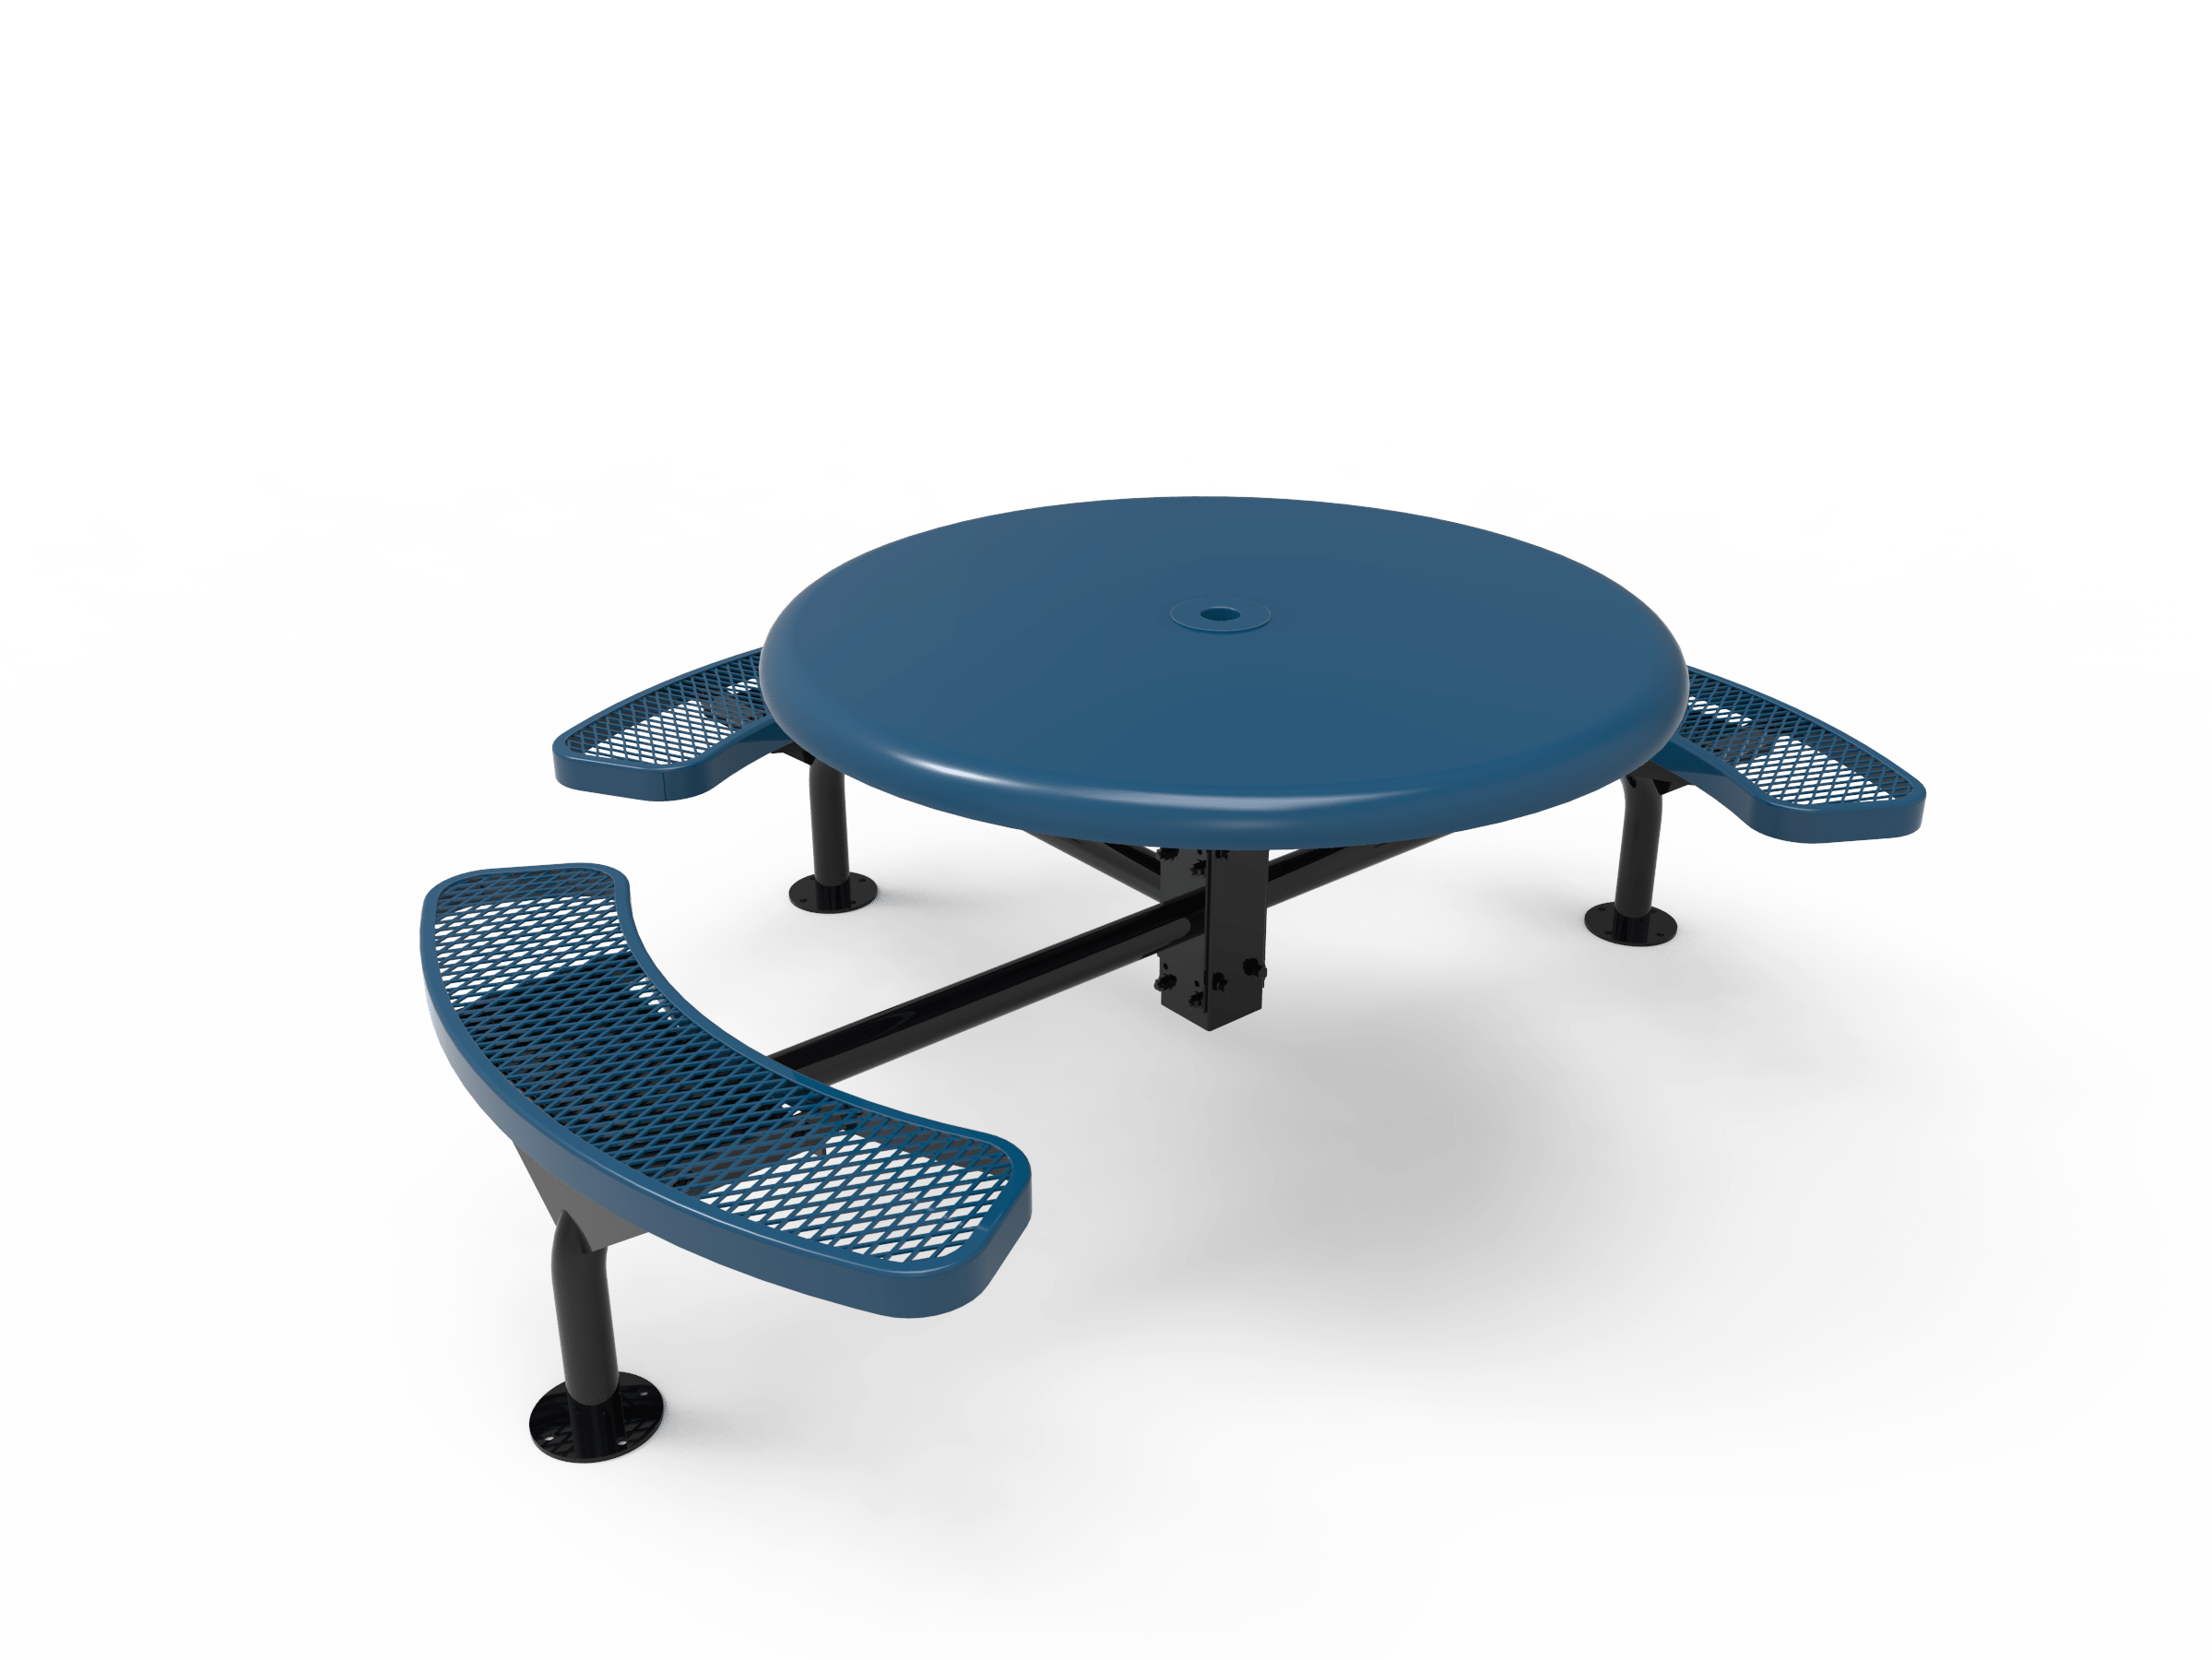 46″ Round Solid Top Nexus Surface Table With 3 Seats-Mesh
TRS46-C-50-013
Industry Standard Finish
$1469.00
TRS46-A-50-013
Advantage Premium Finish
$1859.00
